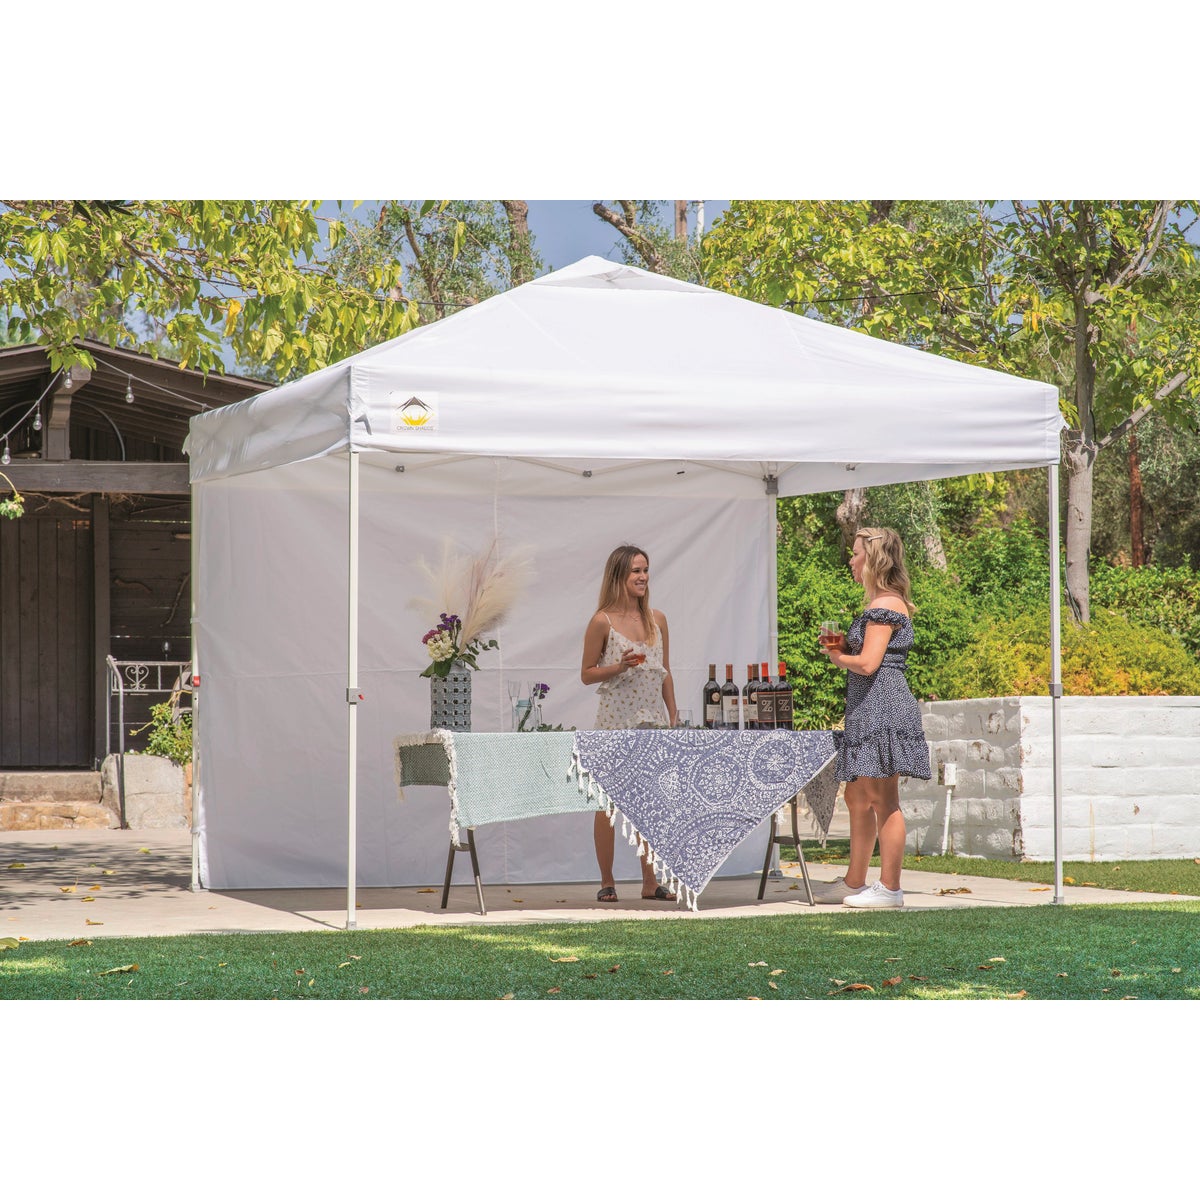 Crown Shade CSHPP100-300D Crown Shade 10 Ft. x 10 Ft. White Steel Frame White Commercial Canopy with 1 Side Wall CSHPP100-300D